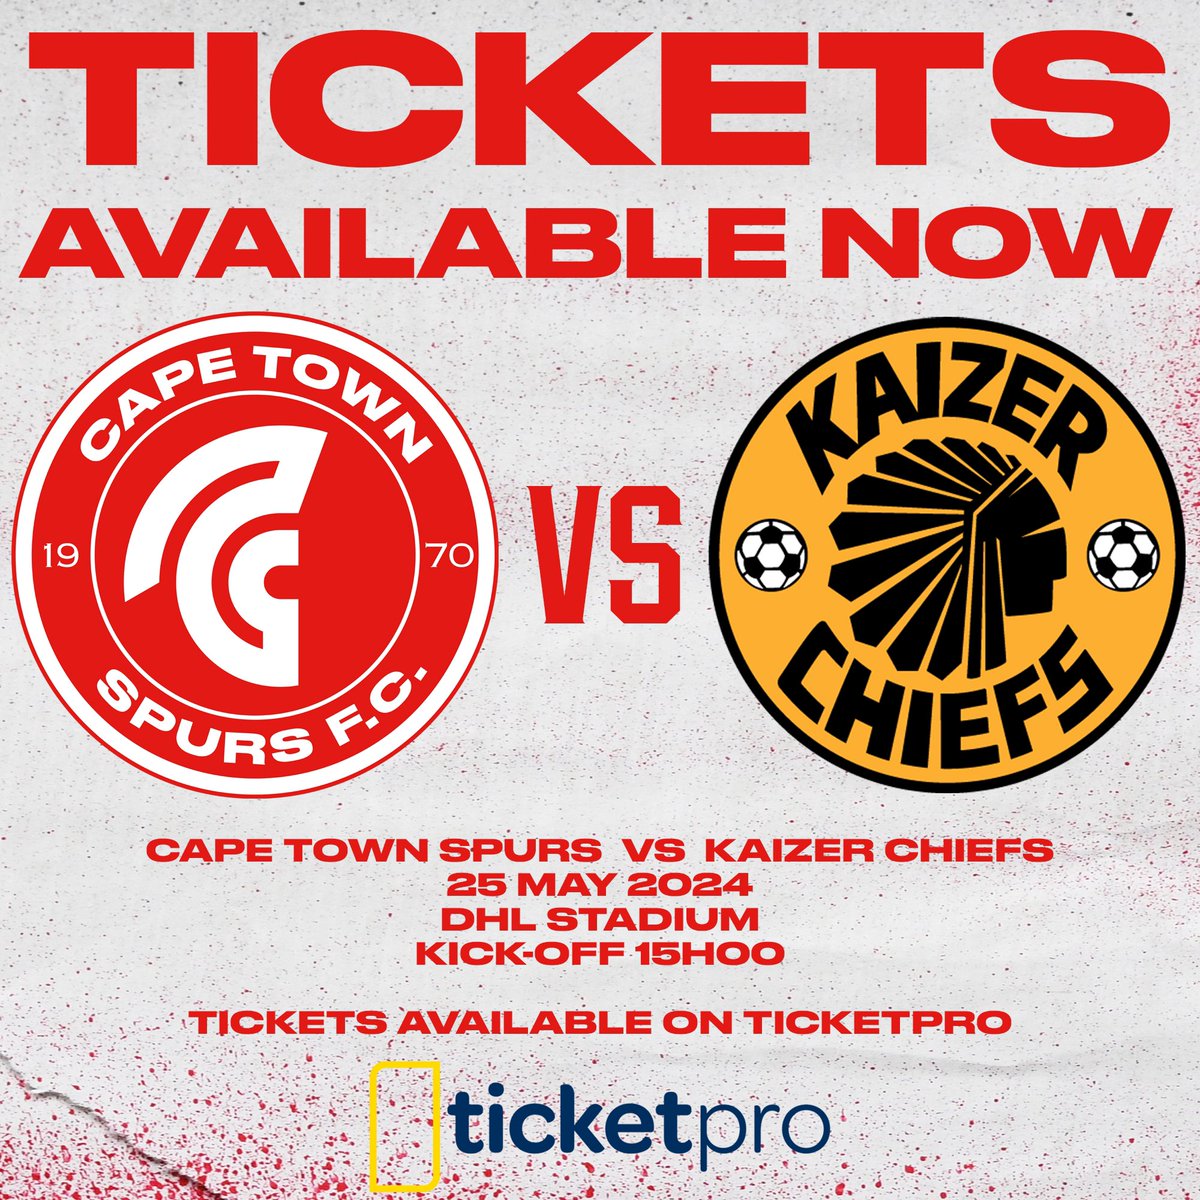 TICKETS AVAILABLE NOW ON TICKETPRO 🎫 Follow Link below 🔗 ticketpros.co.za/portal/web/ind… #CAPETOWNSPURS #URBANWARRIORS #PSL #DSTVPREMIERSHIP #OURYOUTHOURFUTURE #CAPETOWN #SOUTHAFRICA